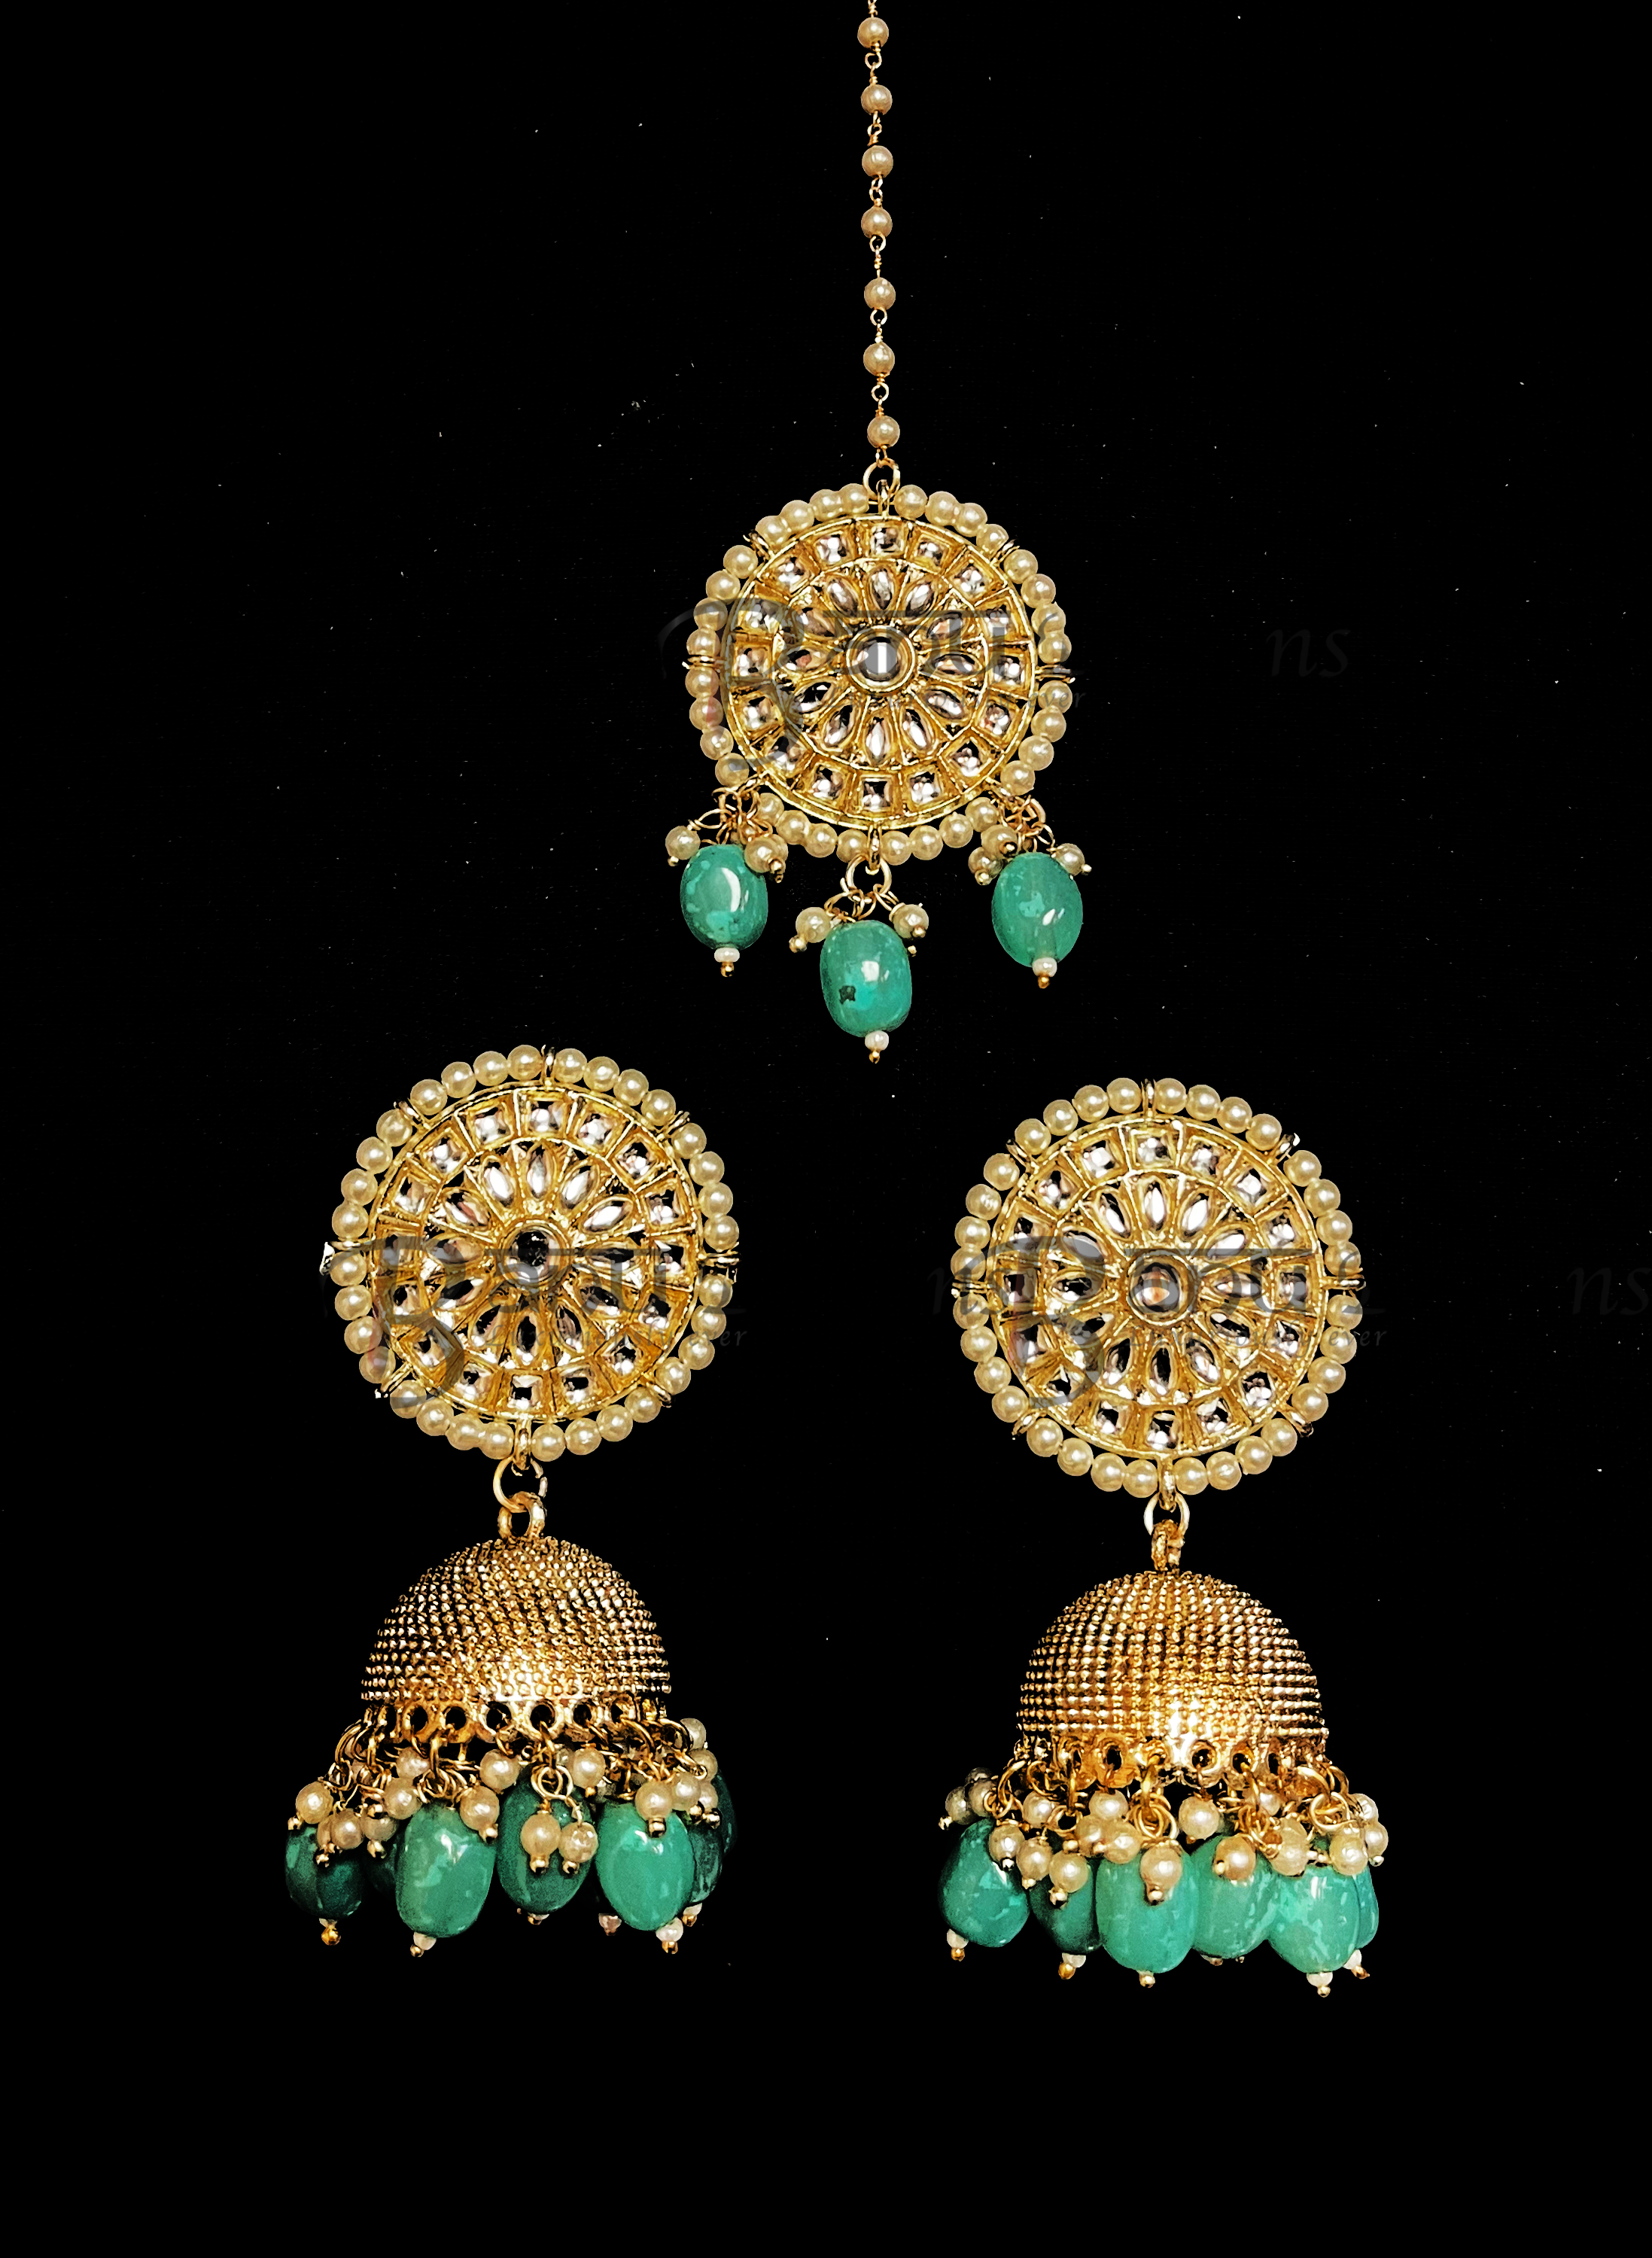 Turquoise Tikka & Earrings with pearls